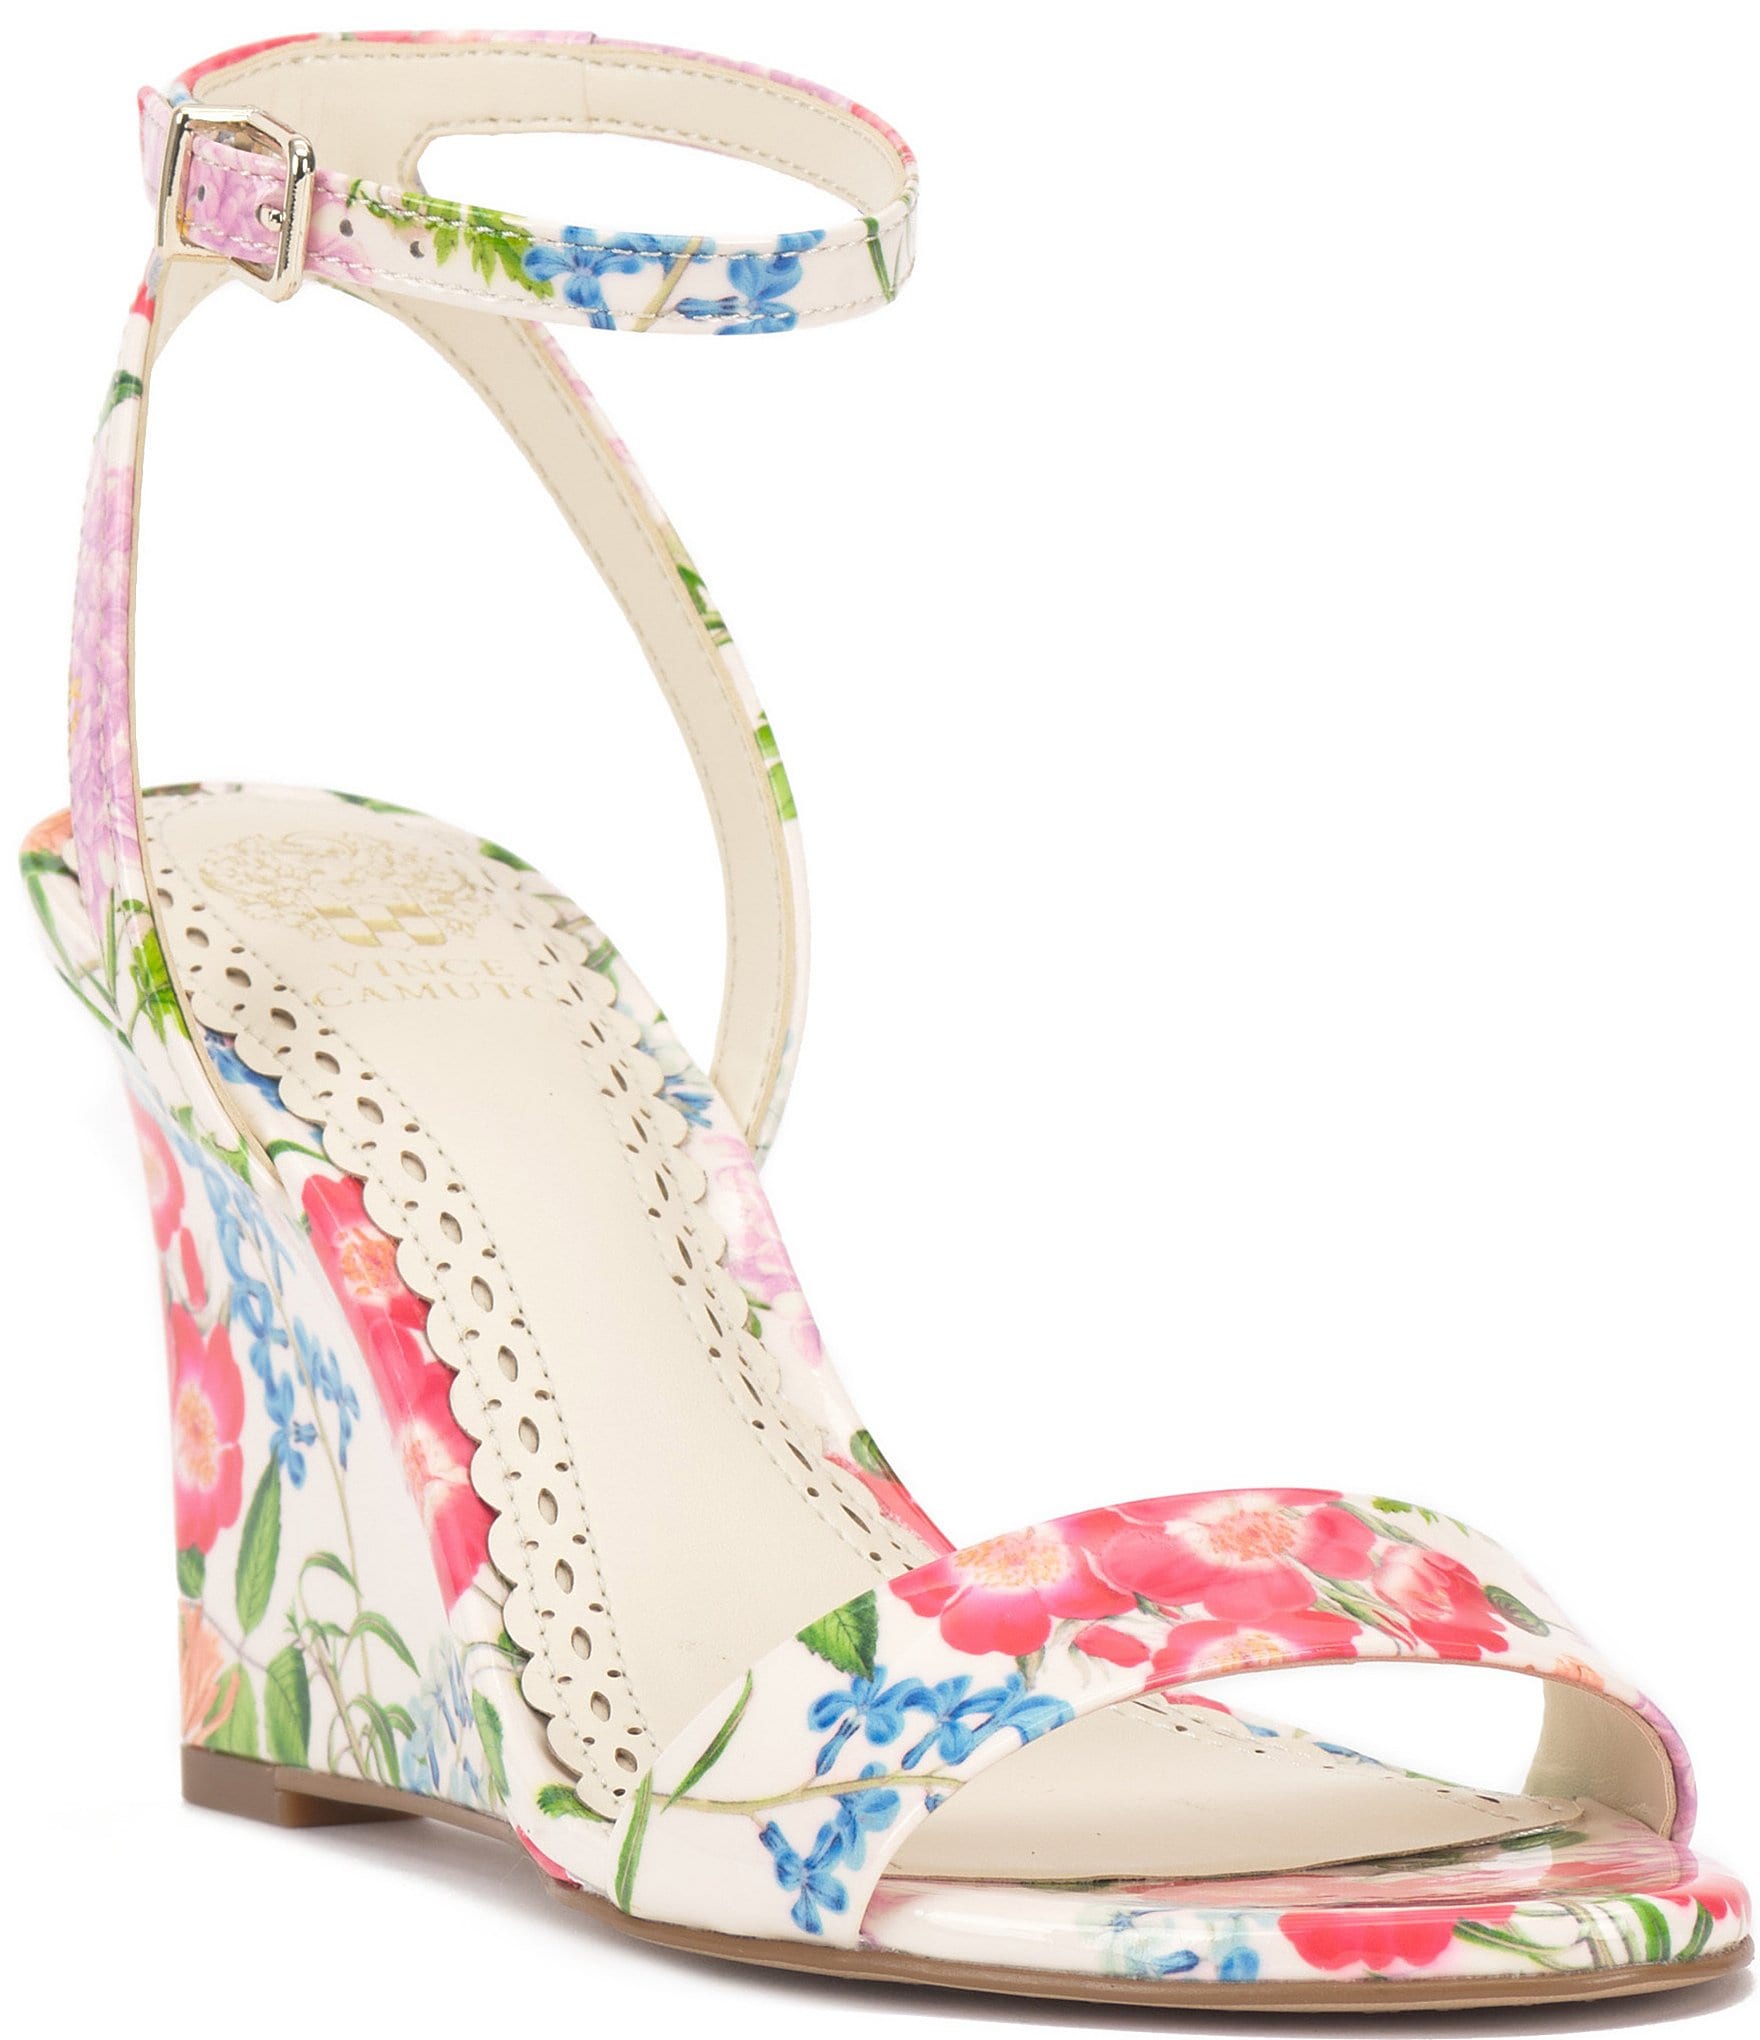 https://dimg.dillards.com/is/image/DillardsZoom/zoom/vince-camuto-jefany-leather-floral-wedge-sandals/00000000_zi_8c1e0f33-a9c2-4530-9085-f3a692e38fd1.jpg